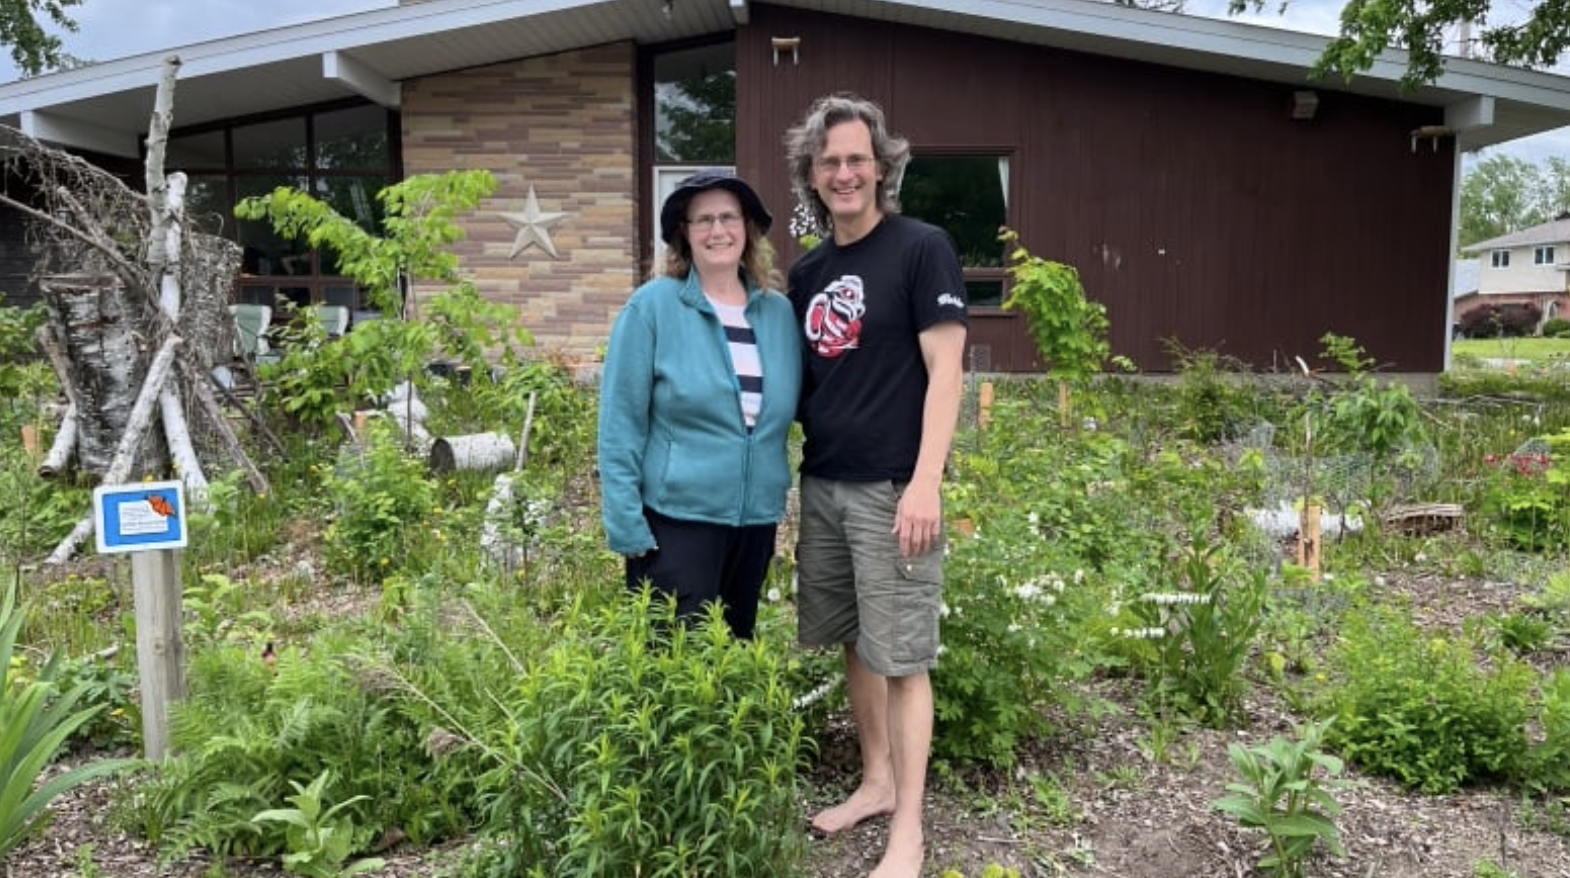 CBC Article: 'Couple's win forces Smiths Falls to revisit approach to 'naturalized' lawns' 1